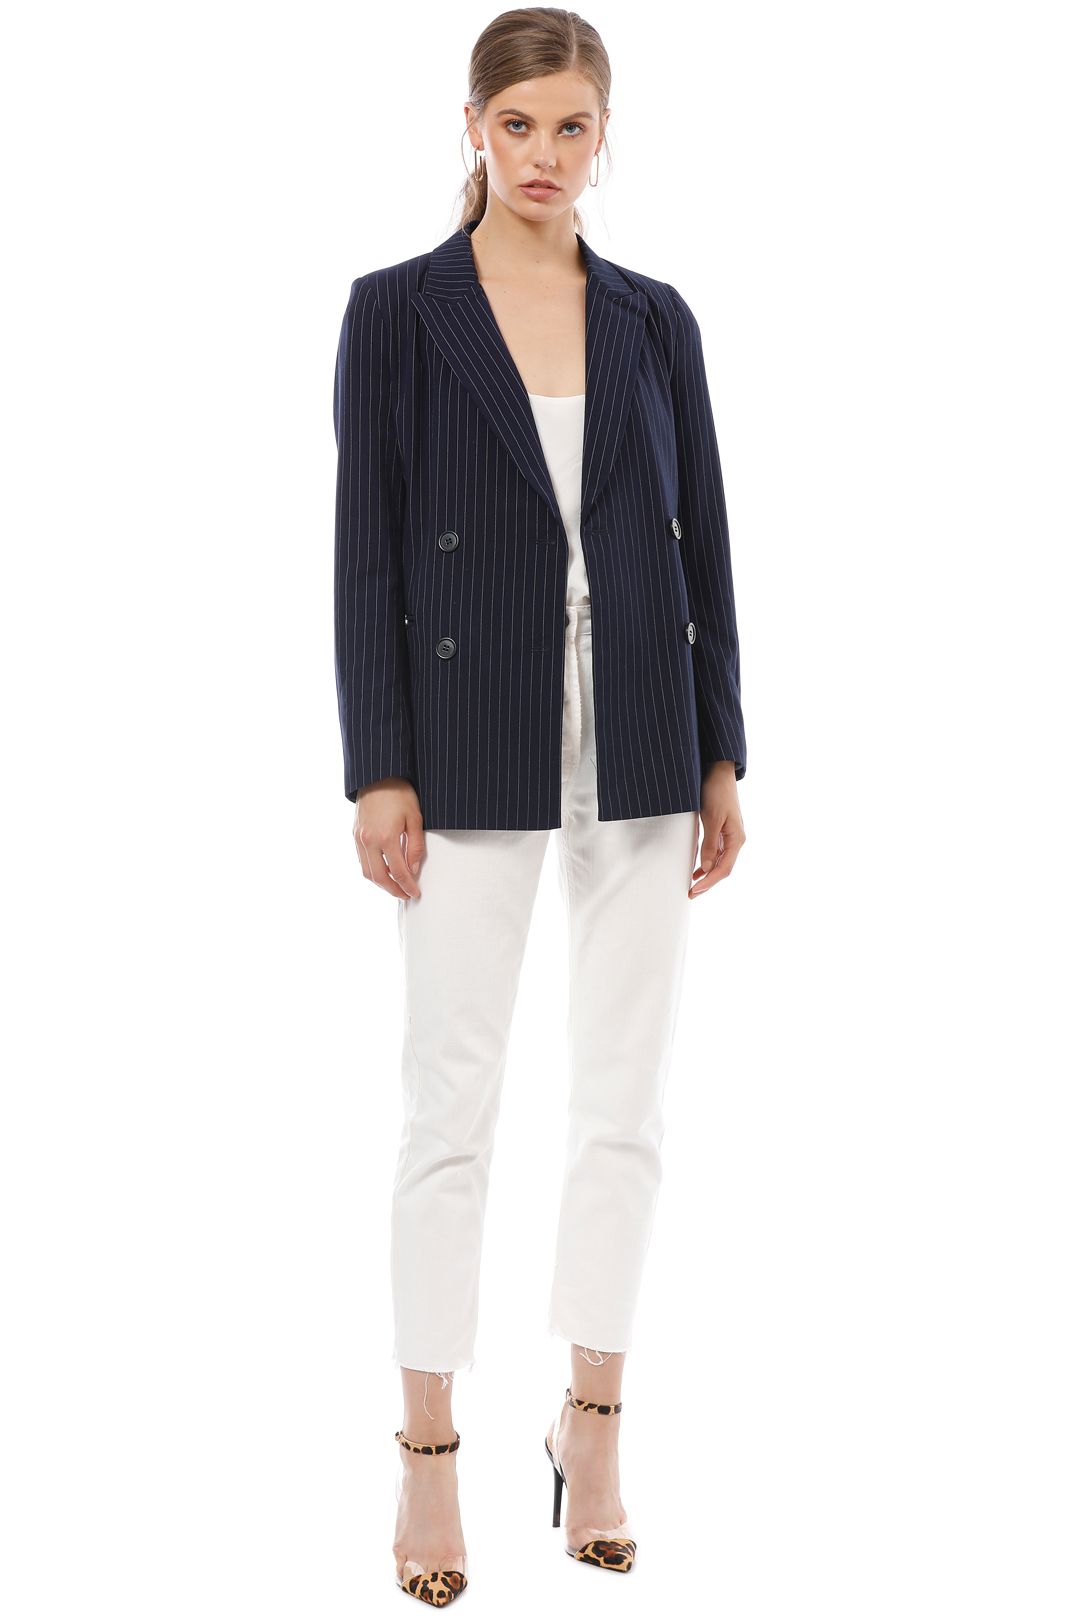 Friend of Audrey - Cecile Navy Striped Blazer - Navy - Front